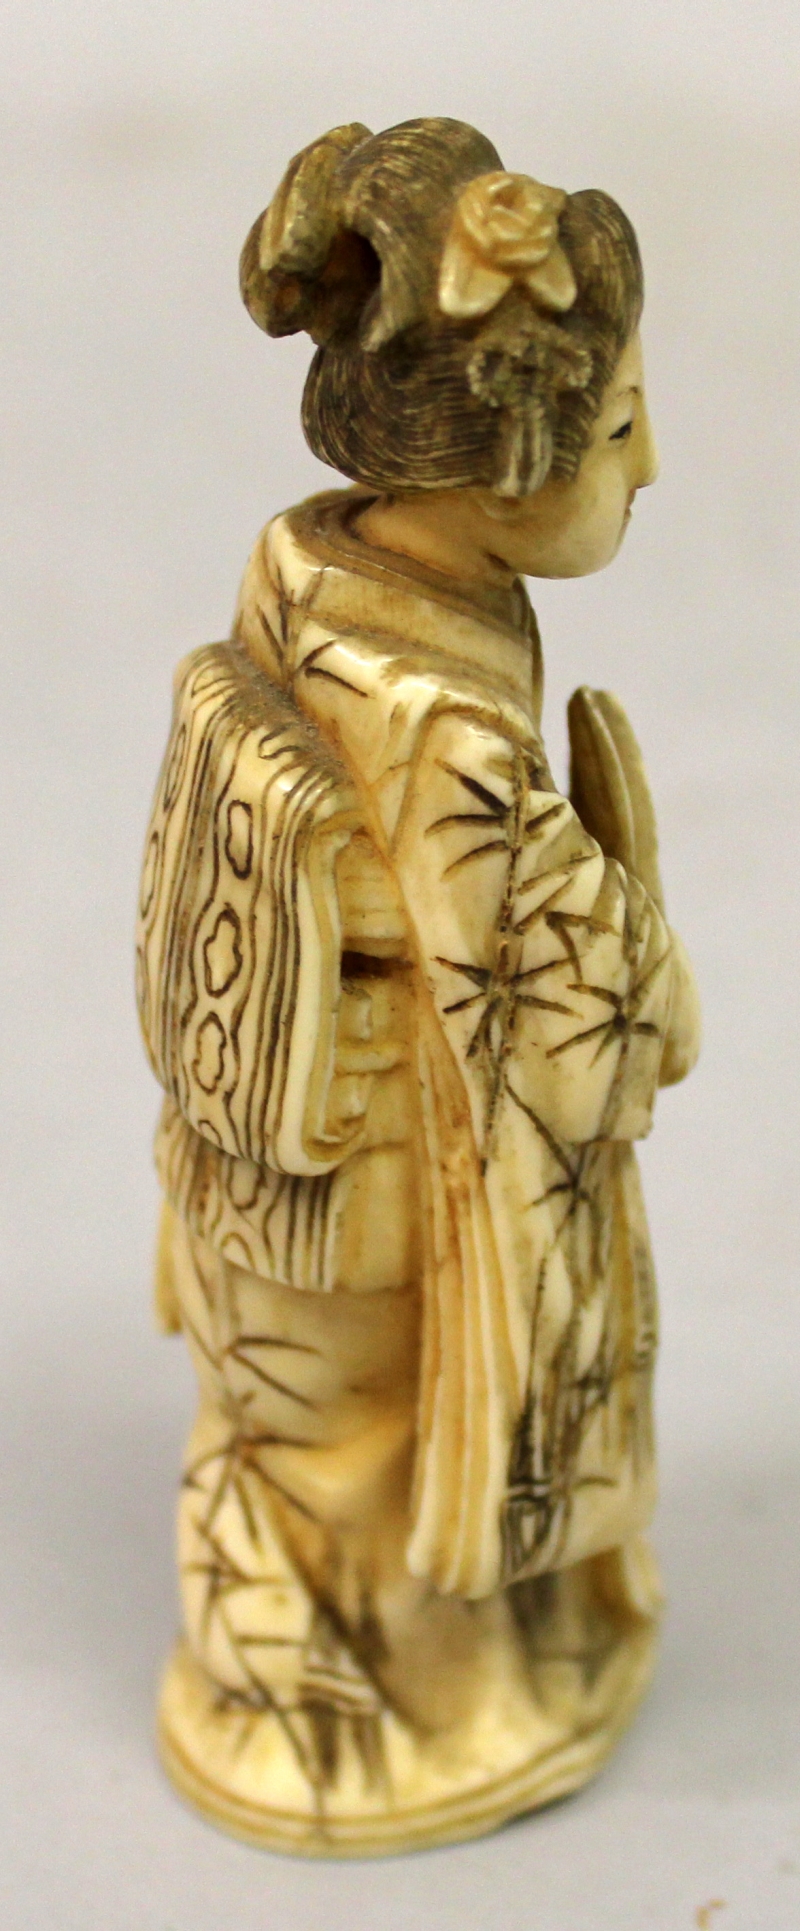 A JAPANESE MEIJI PERIOD IVORY OKIMONO OF A GEISHA, standing in flowing robes and holding a fan, - Image 2 of 5